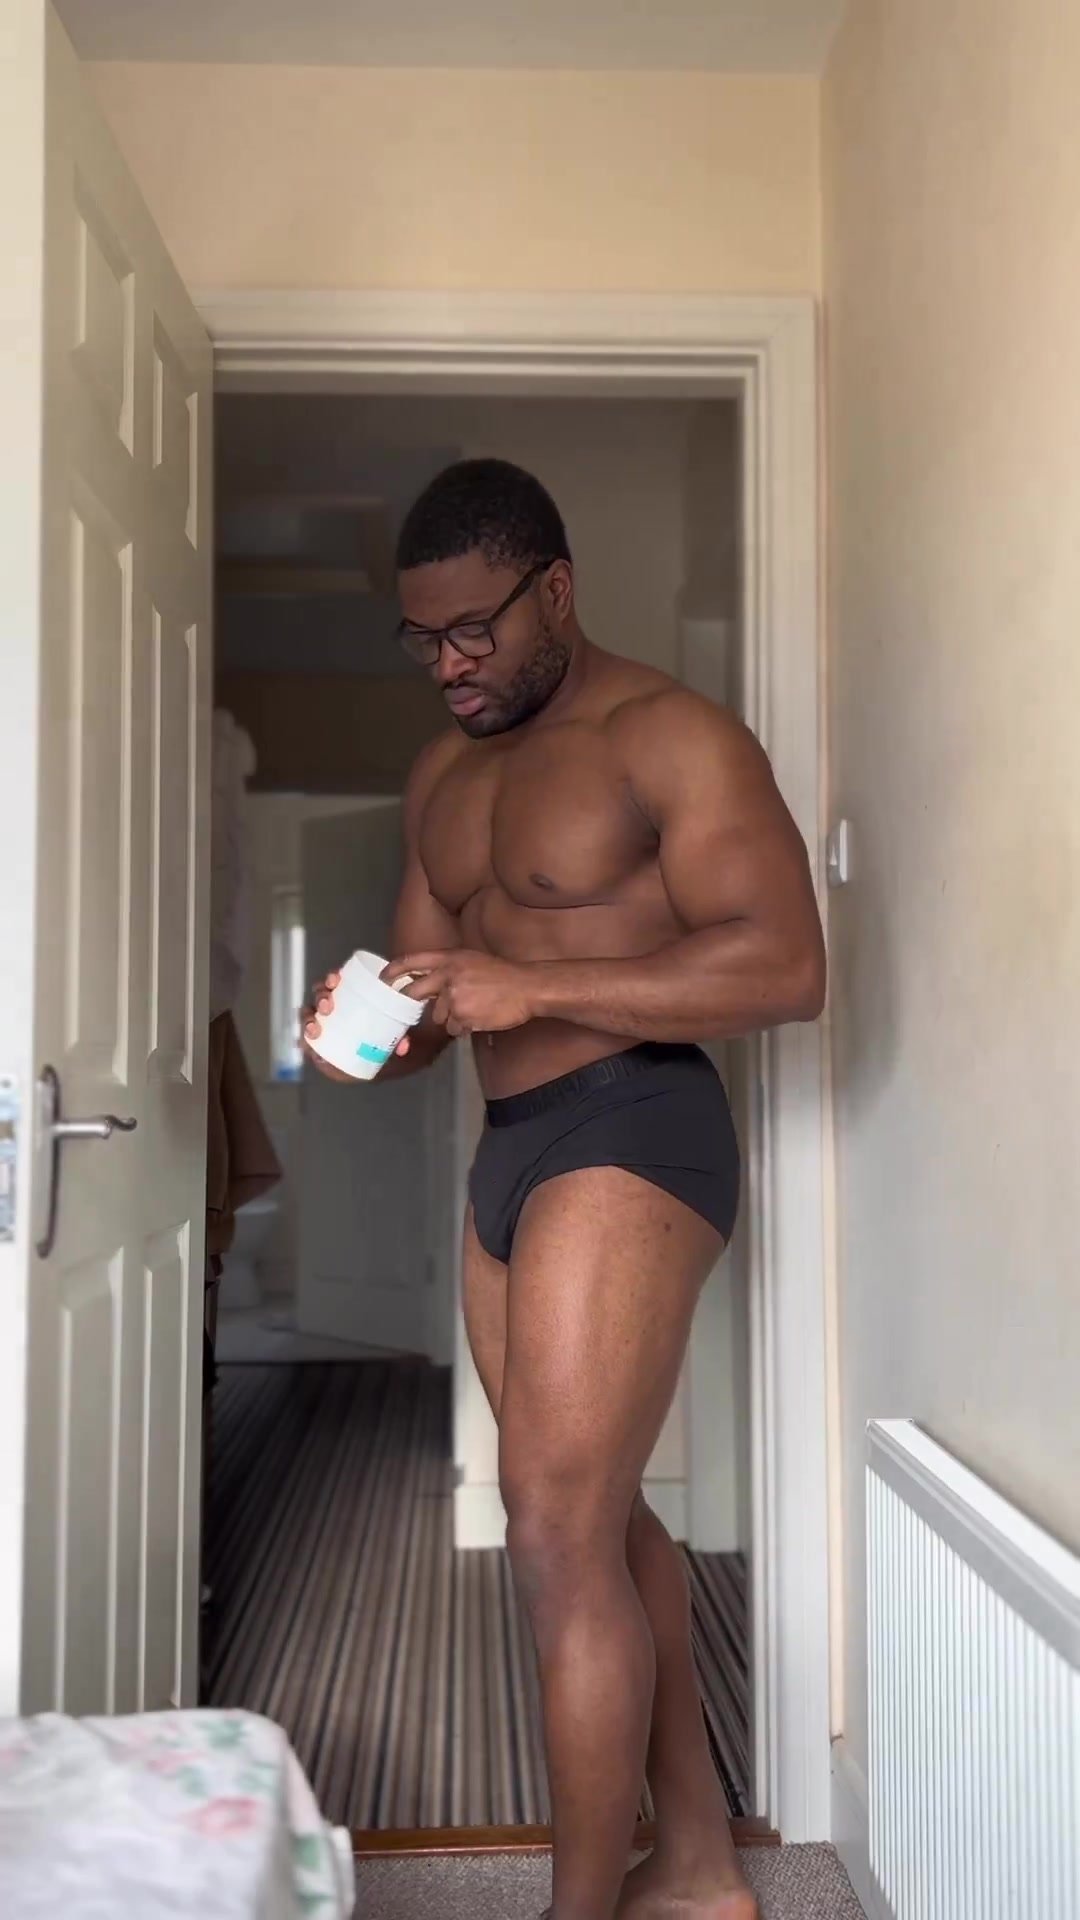 Sexy man gets ready for the day